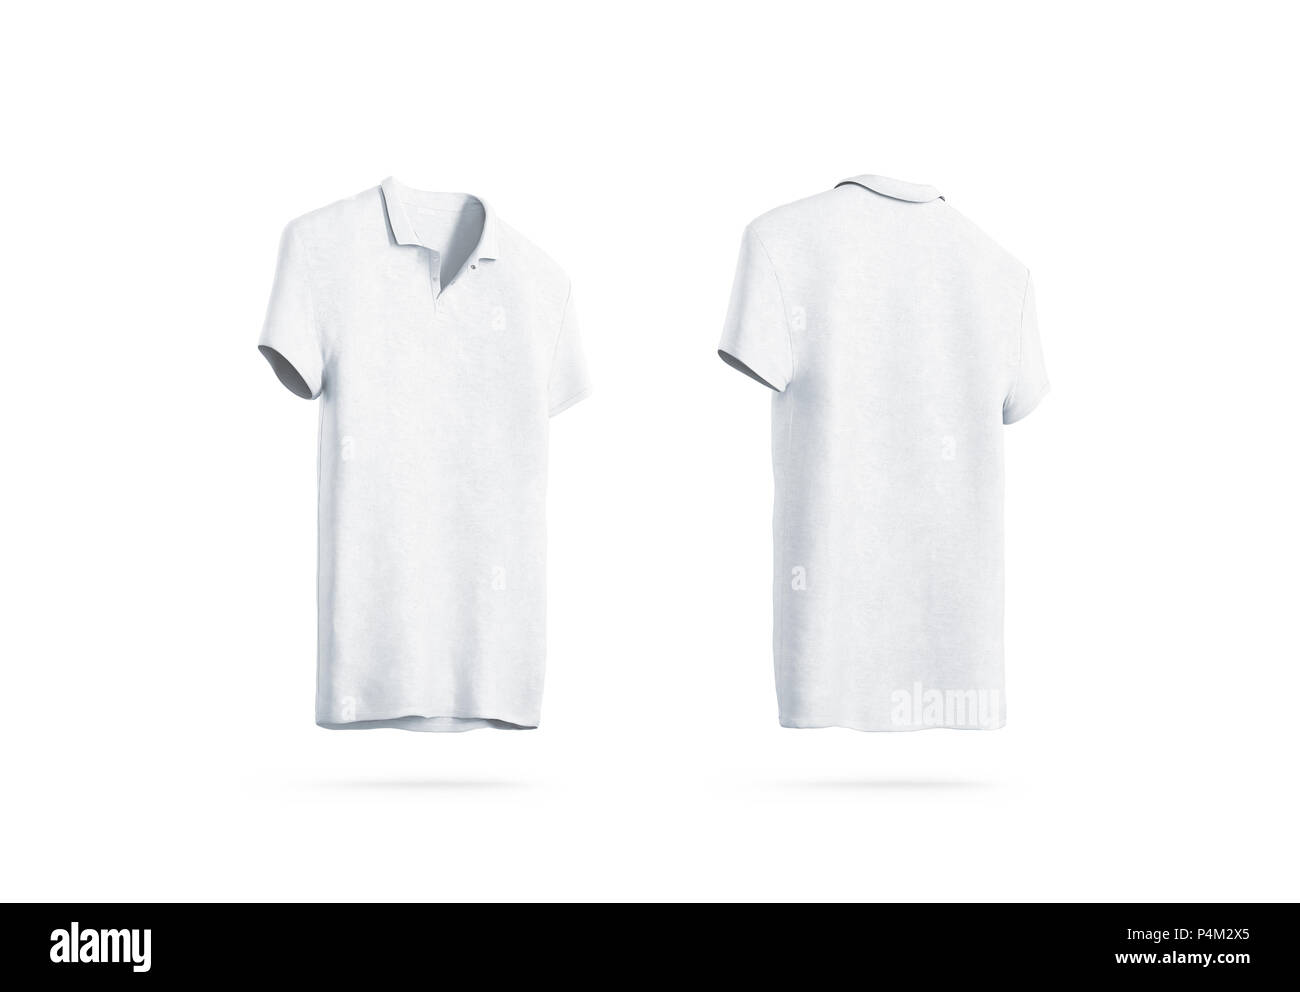 Blank white polo shirt mockup isolated, front and back side view, 3d rendering. Empty sport t-shirt uniform mock up. Plain clothing design template. Cotton clear dress with collar and short sleeves Stock Photo